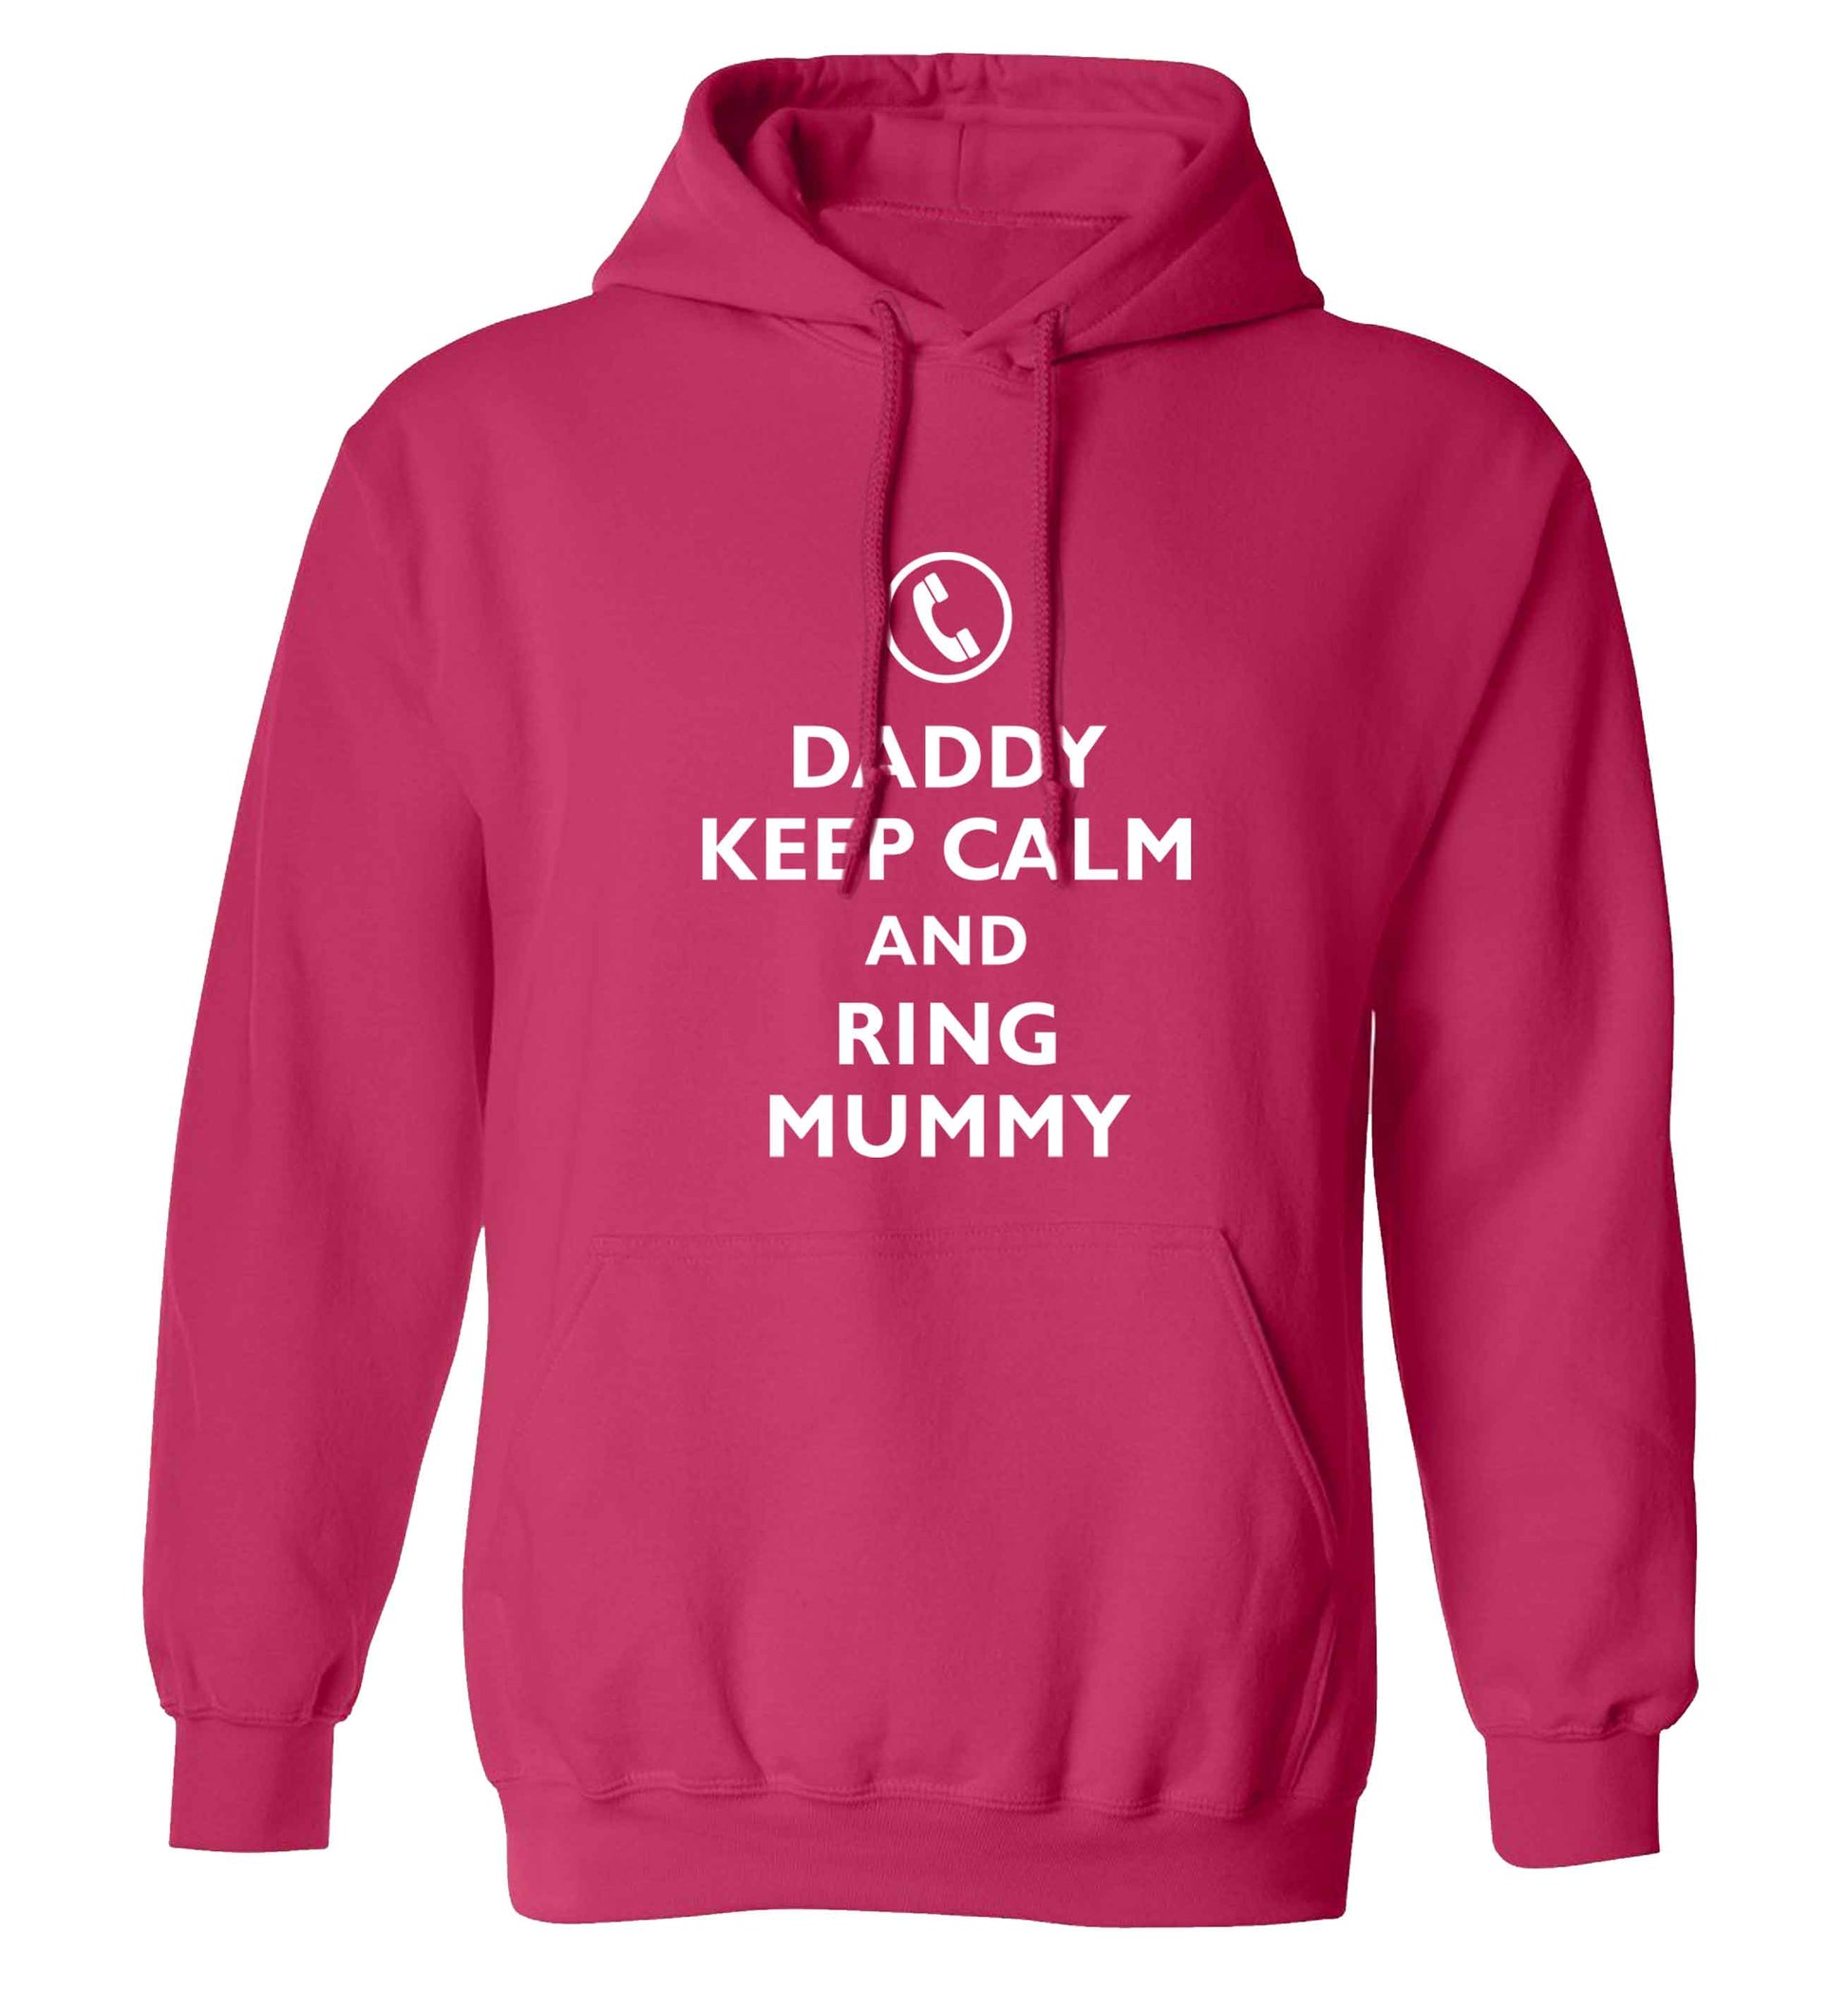 Daddy keep calm and ring mummy adults unisex pink hoodie 2XL